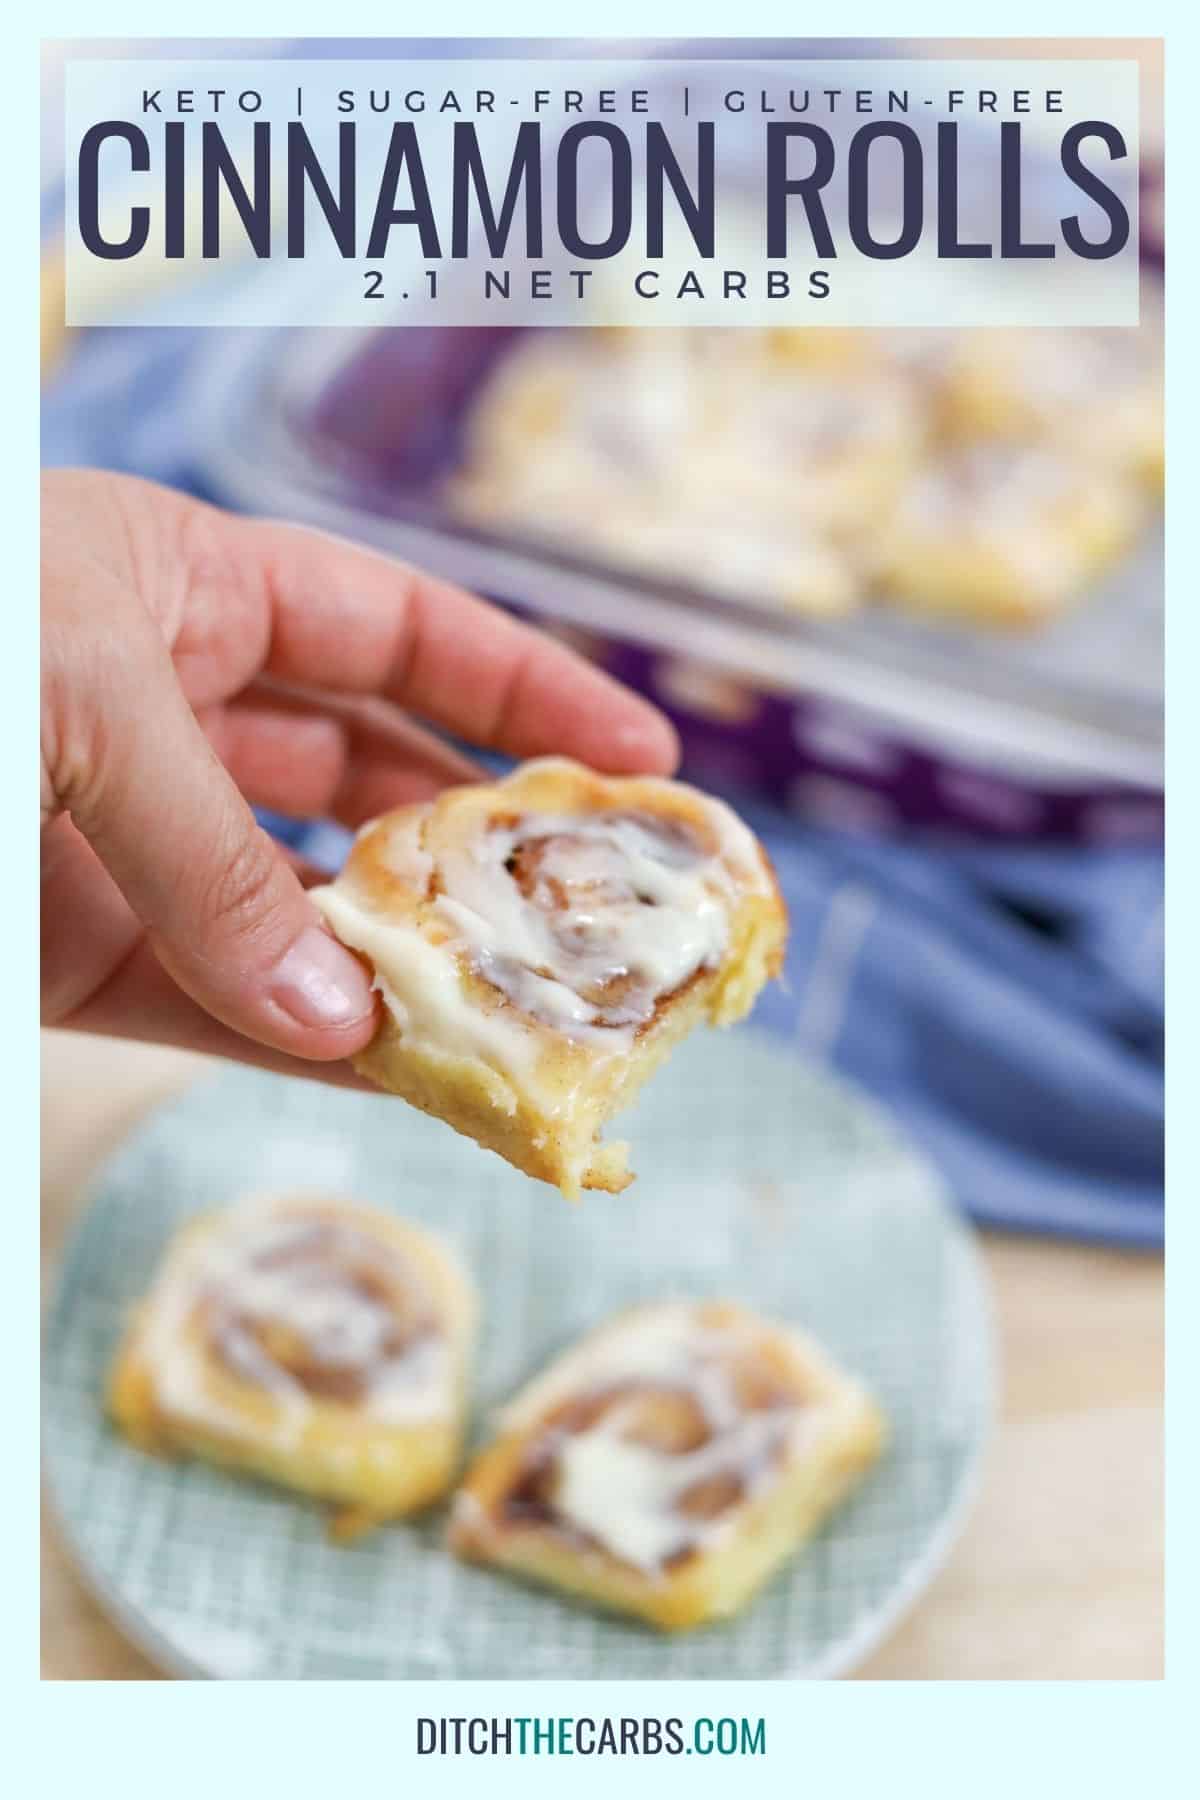 A hand lifting a keto cinnamon roll off a place with two more cinnamon rolls. The pan of rolls in the background.